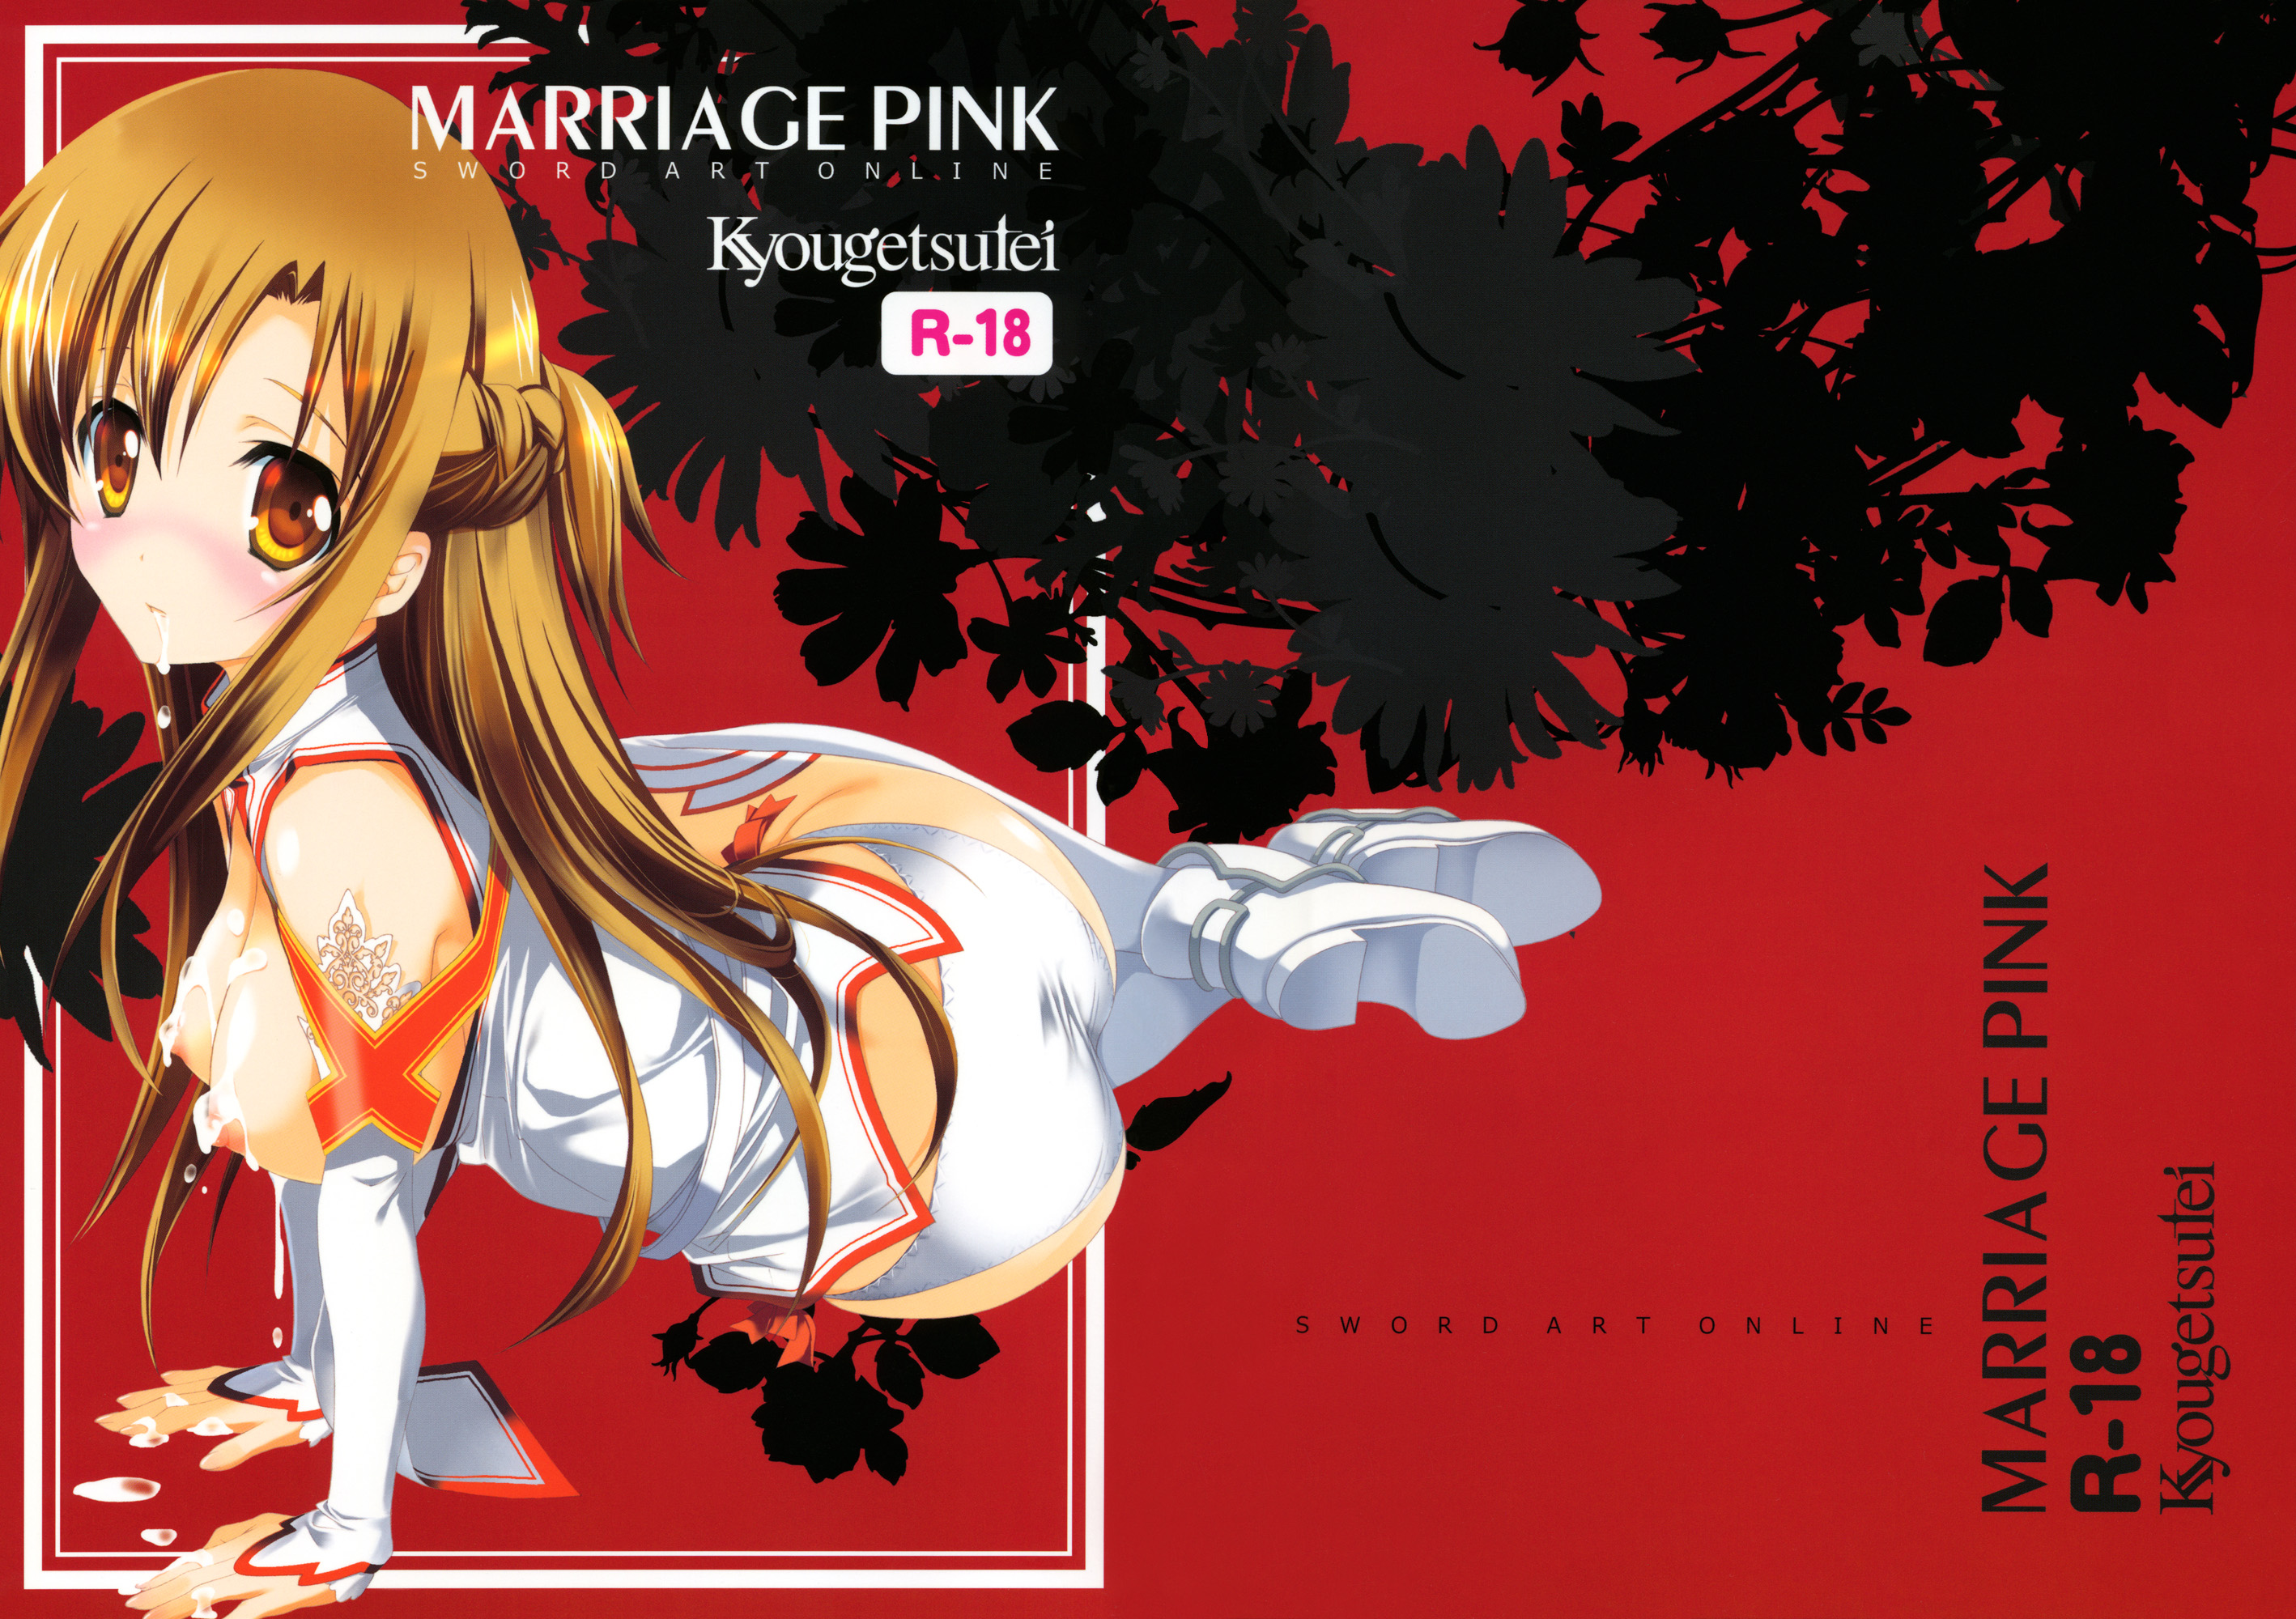 MARRIAGE PINK 001